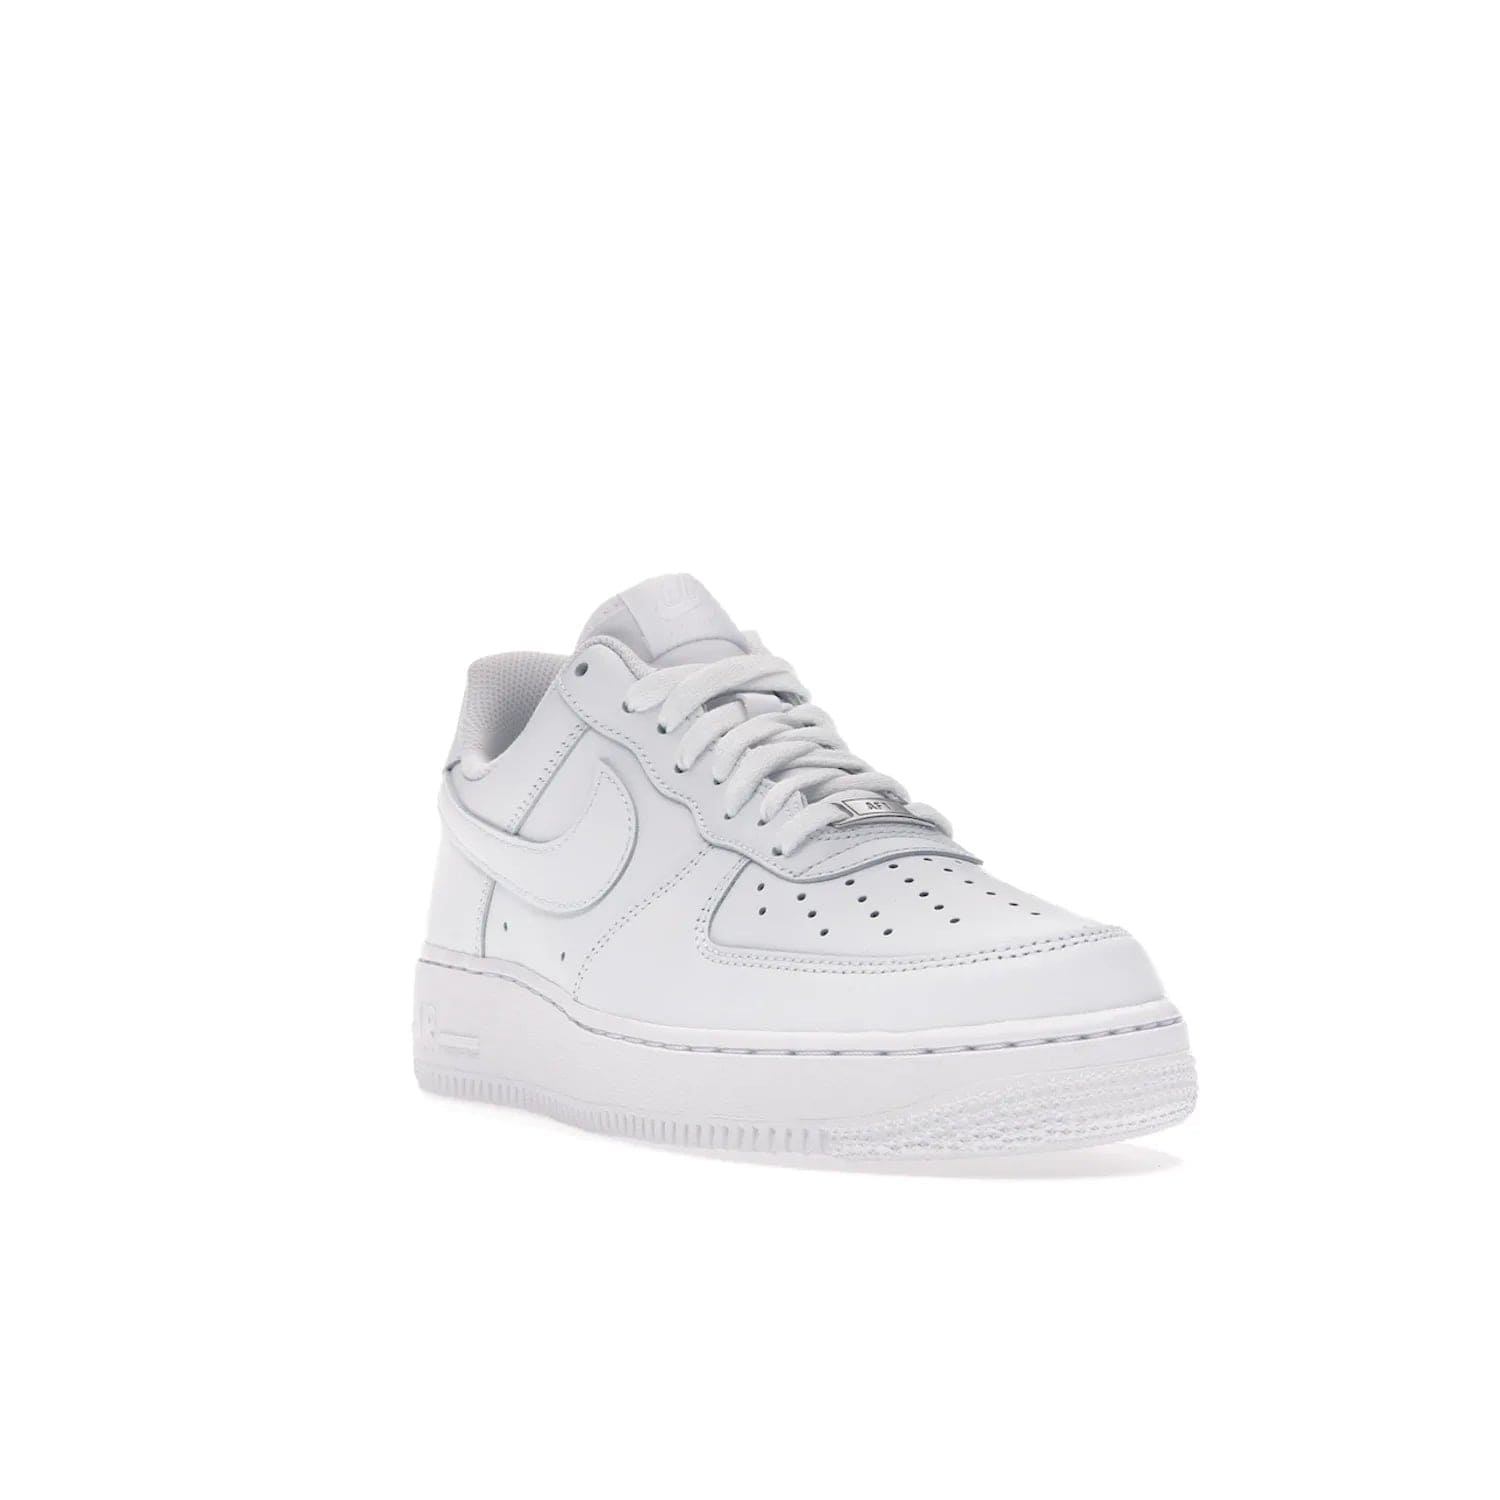 Nike Air Force 1 Low '07 White - Image 7 - Only at www.BallersClubKickz.com - ##
Iconic Swoosh overlays and crisp white sole make the classic Nike Air Force 1 Low White '07 an essential colorway. Classic for seasoned heads and new fans alike.